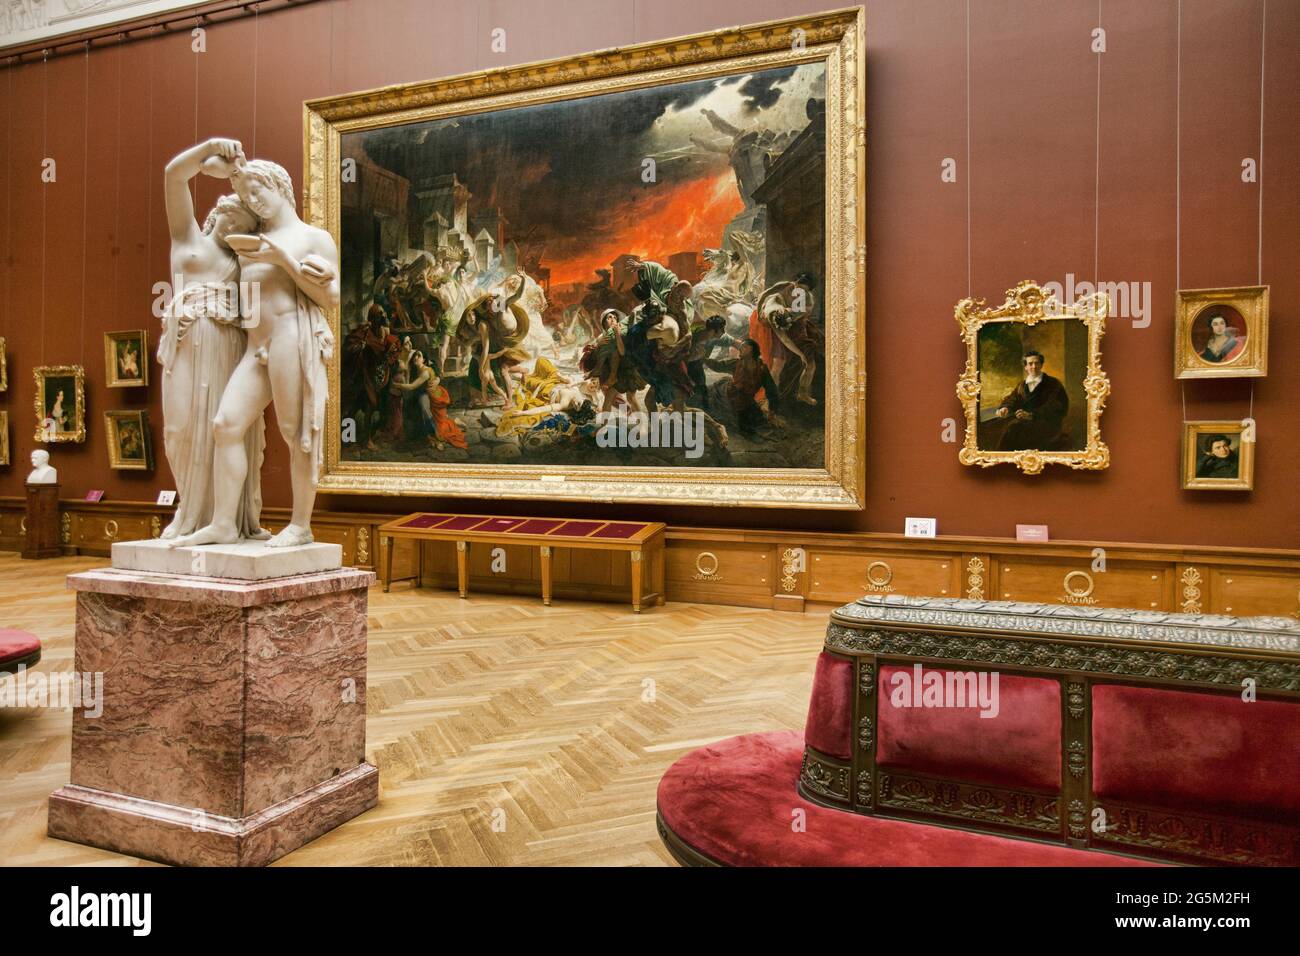 The exposition of the Russian Museum, artist of the canvas The Last Day of Pompeii Karl Bryullov, Russkiy museum, St. Petersburg, Russia, Europe Stock Photo